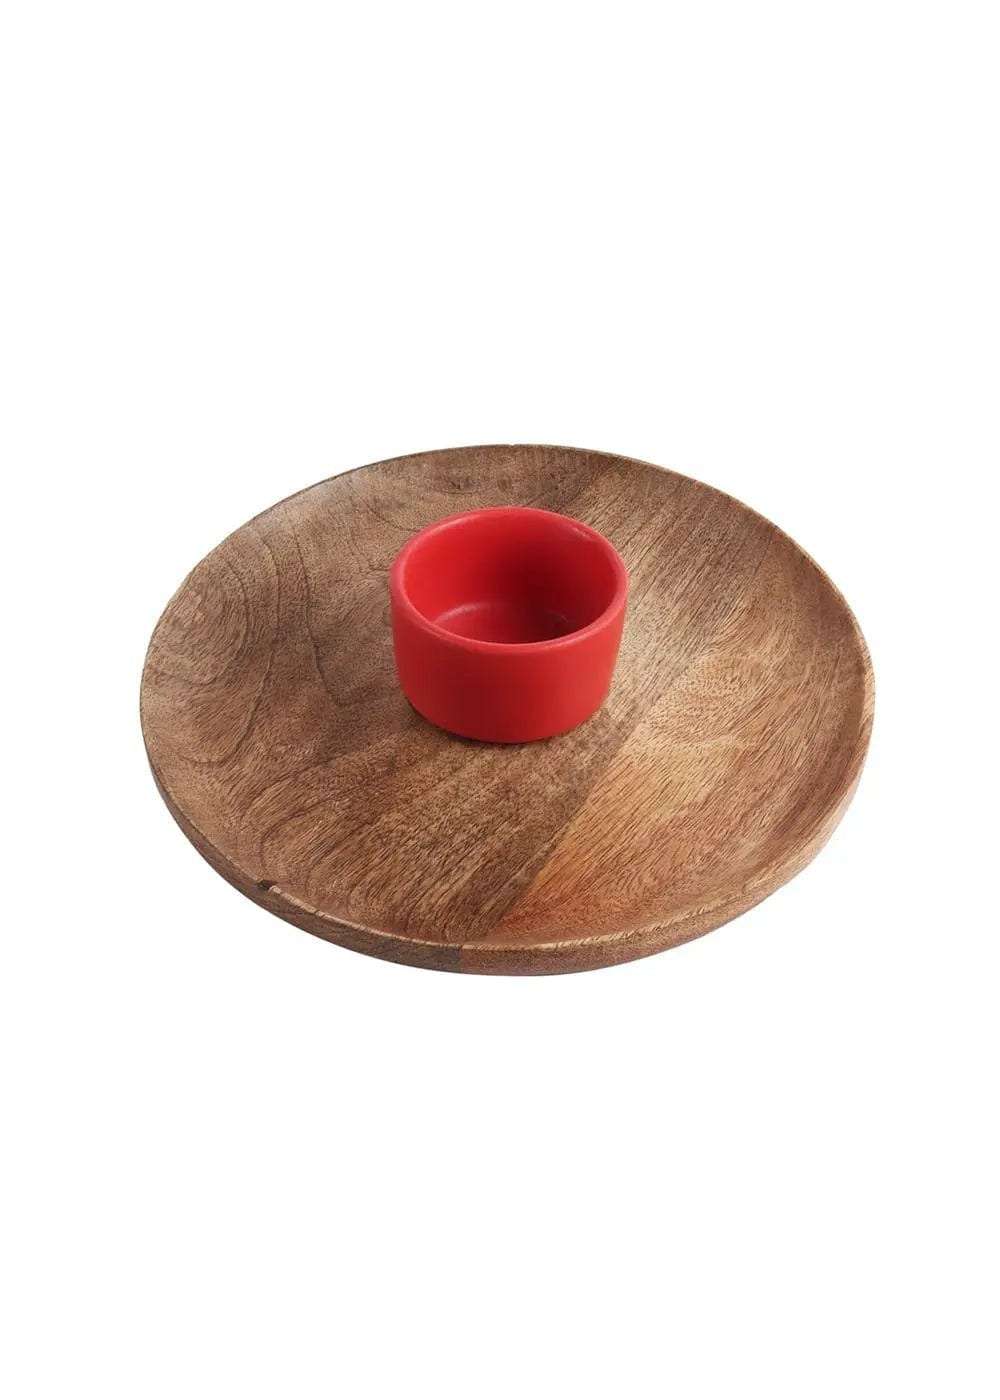 Mango Wood Platters with Ceramic Chutney Bowls Writings On The Wall home decor